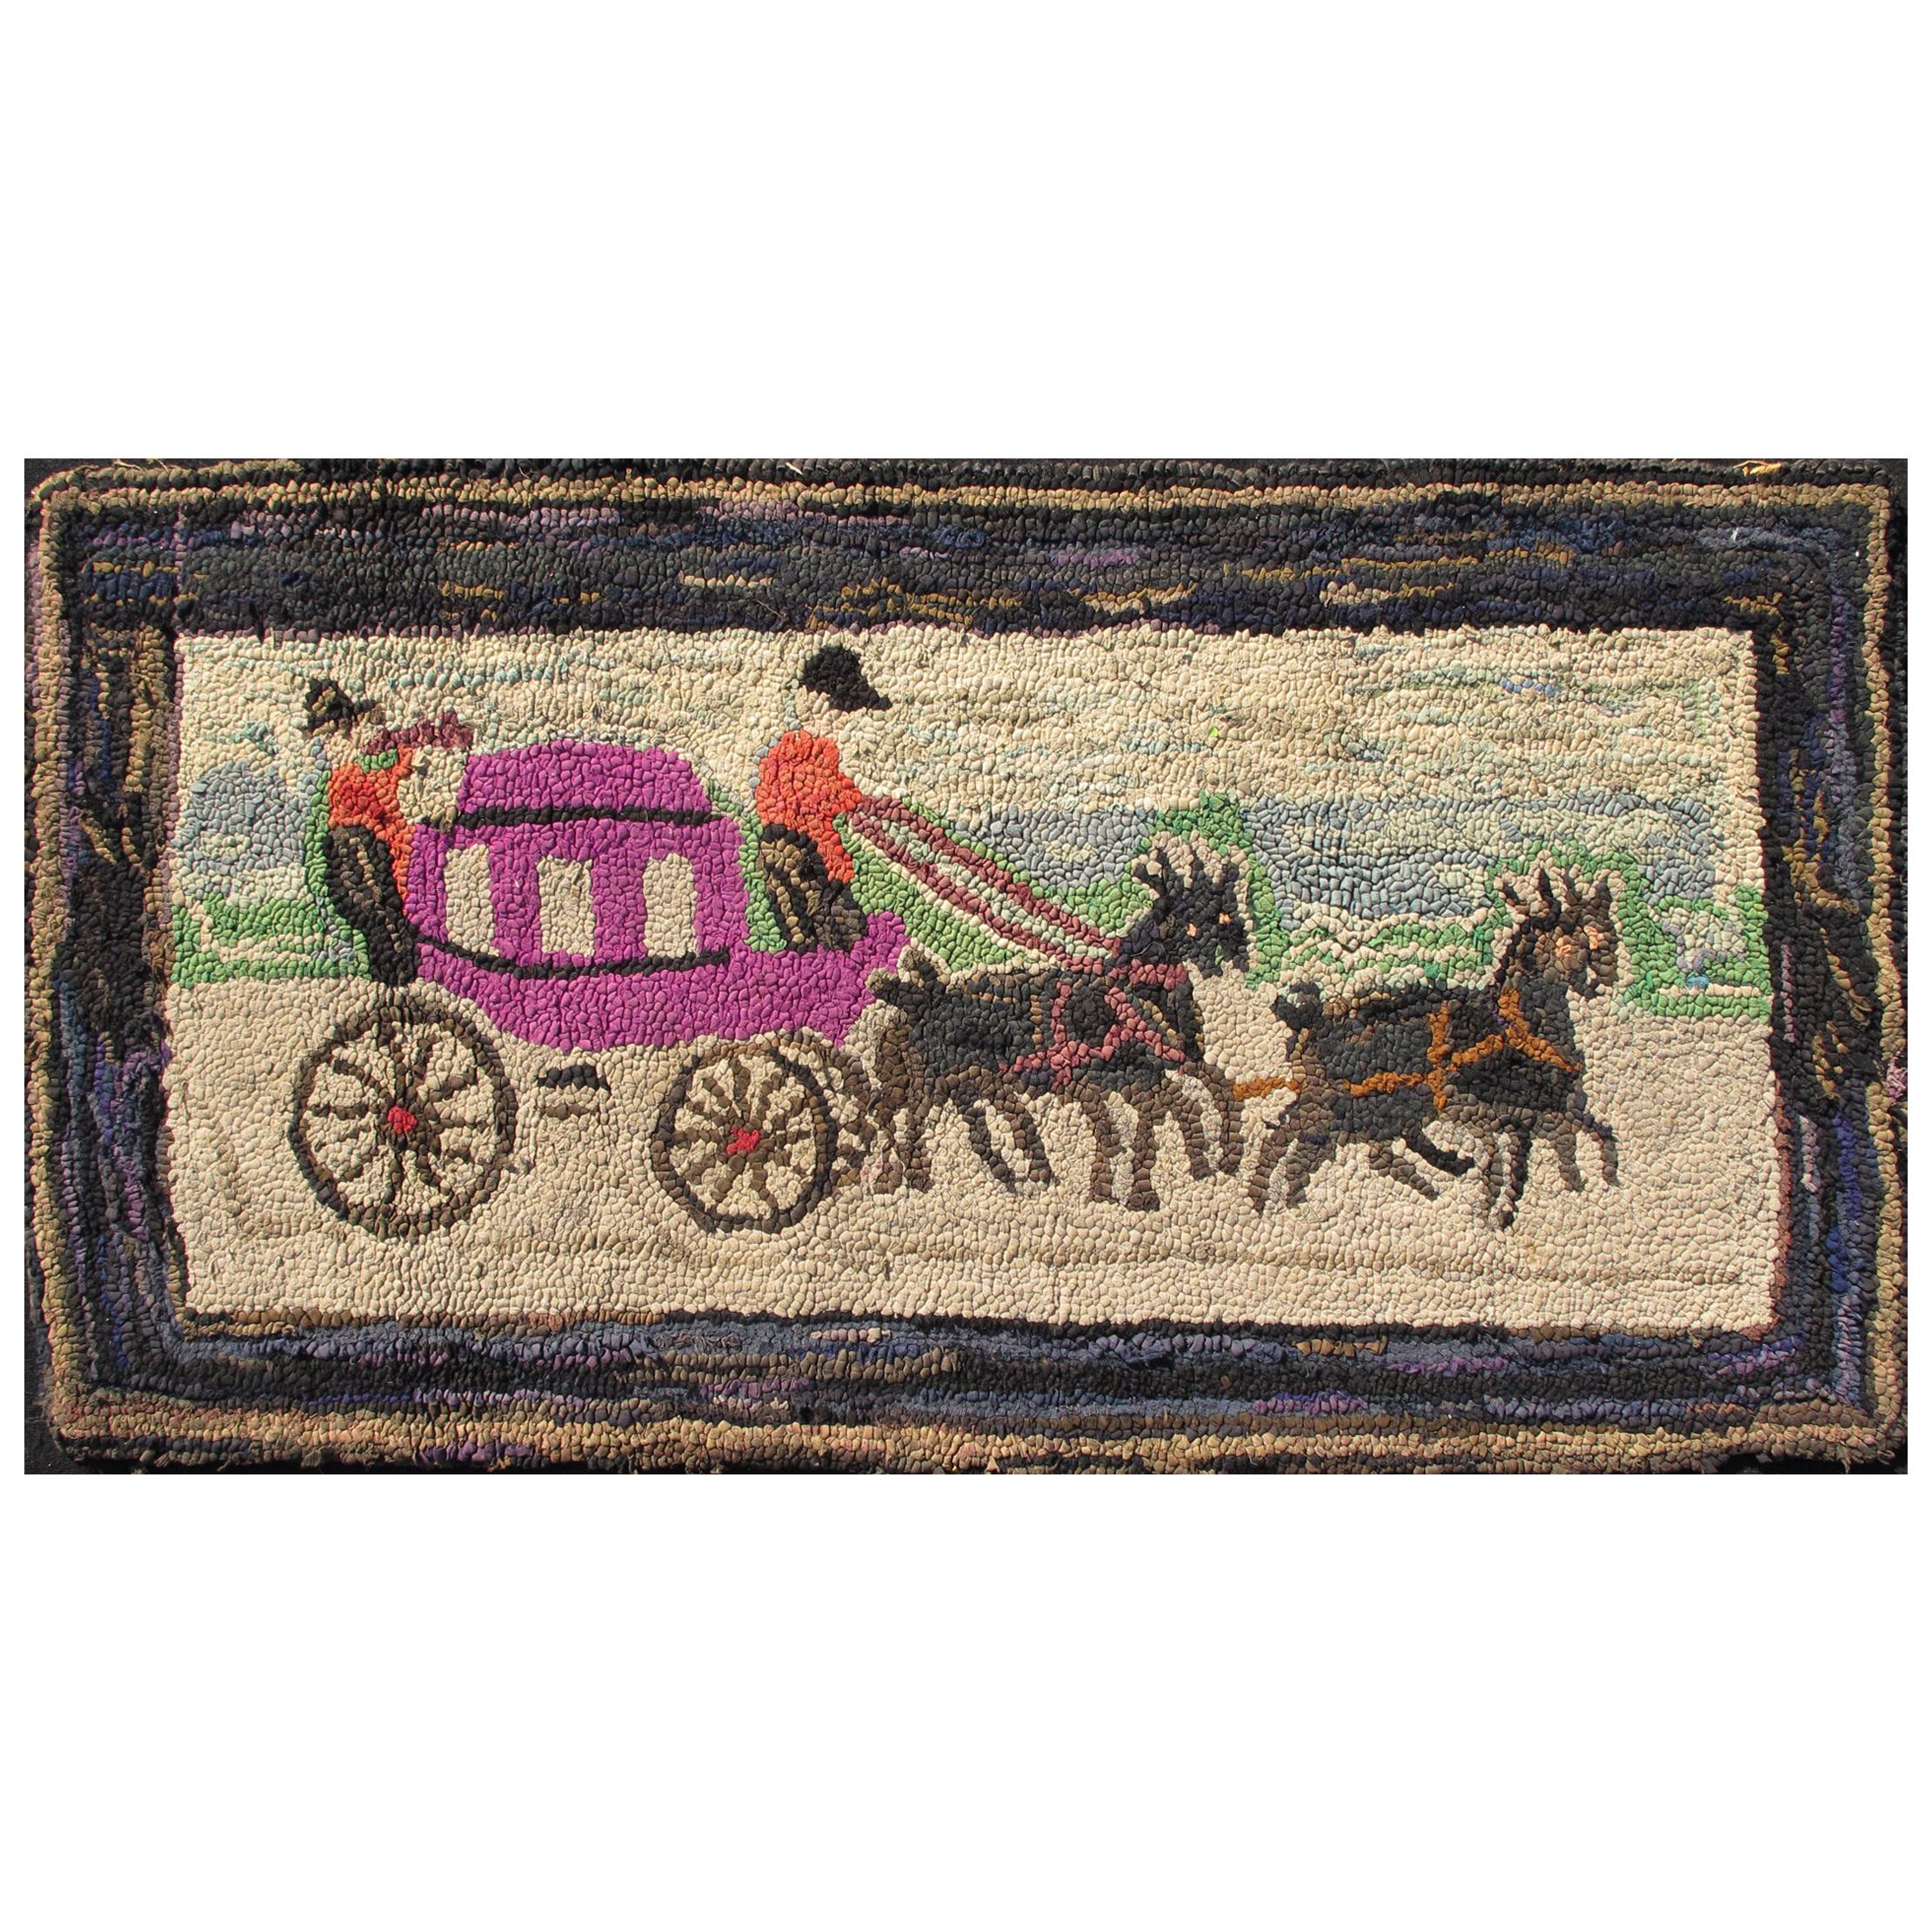 Pictorial Antique American Hooked Rug Horse & Buggy in Multi Colors